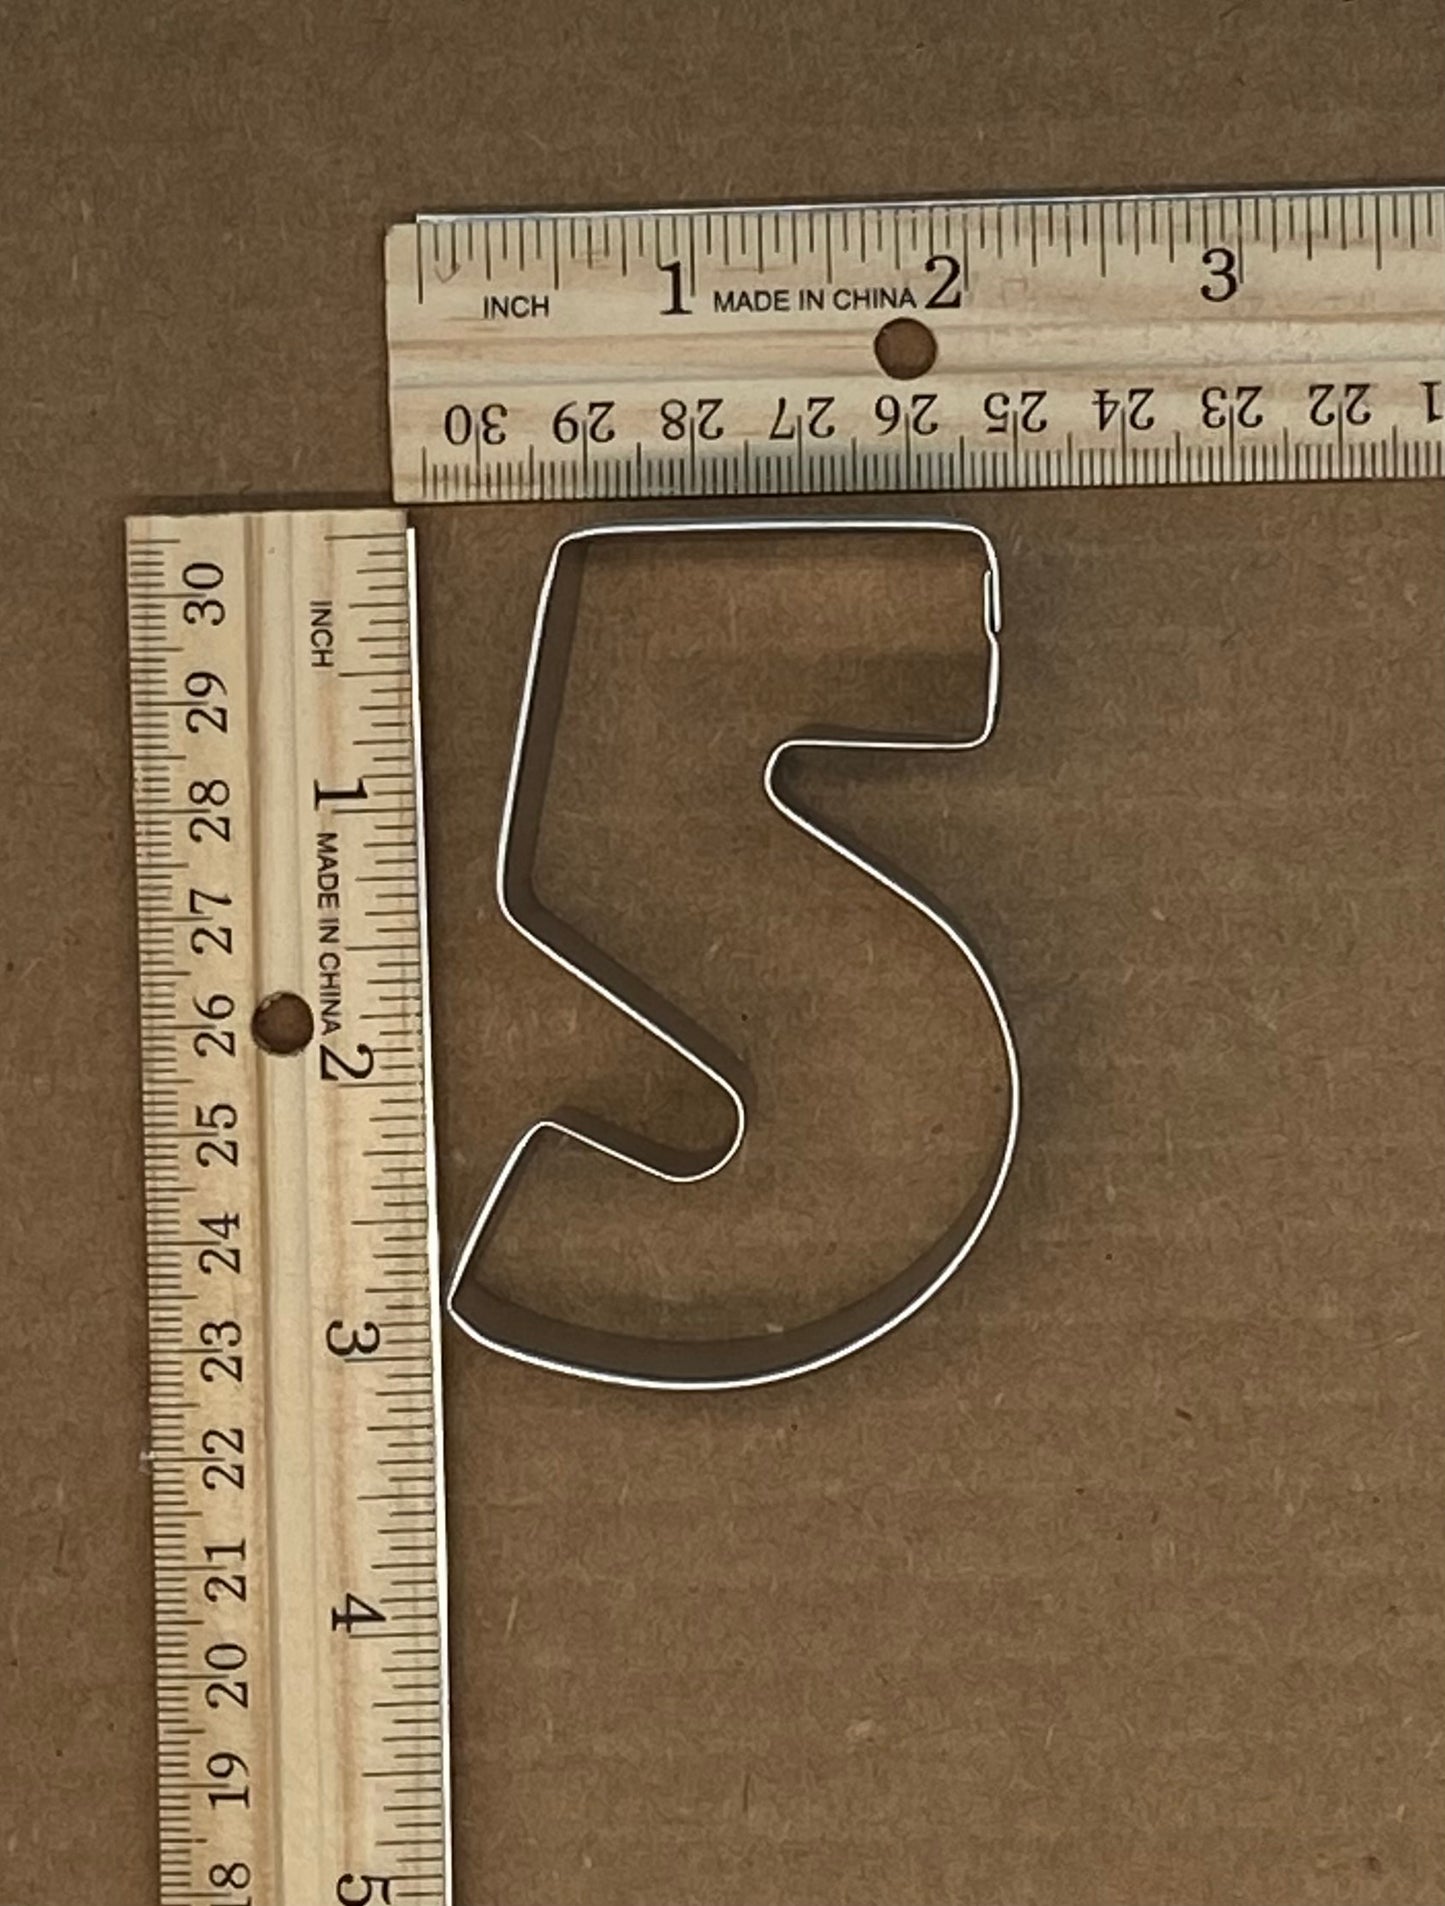 Number 5 Cookie Cutter